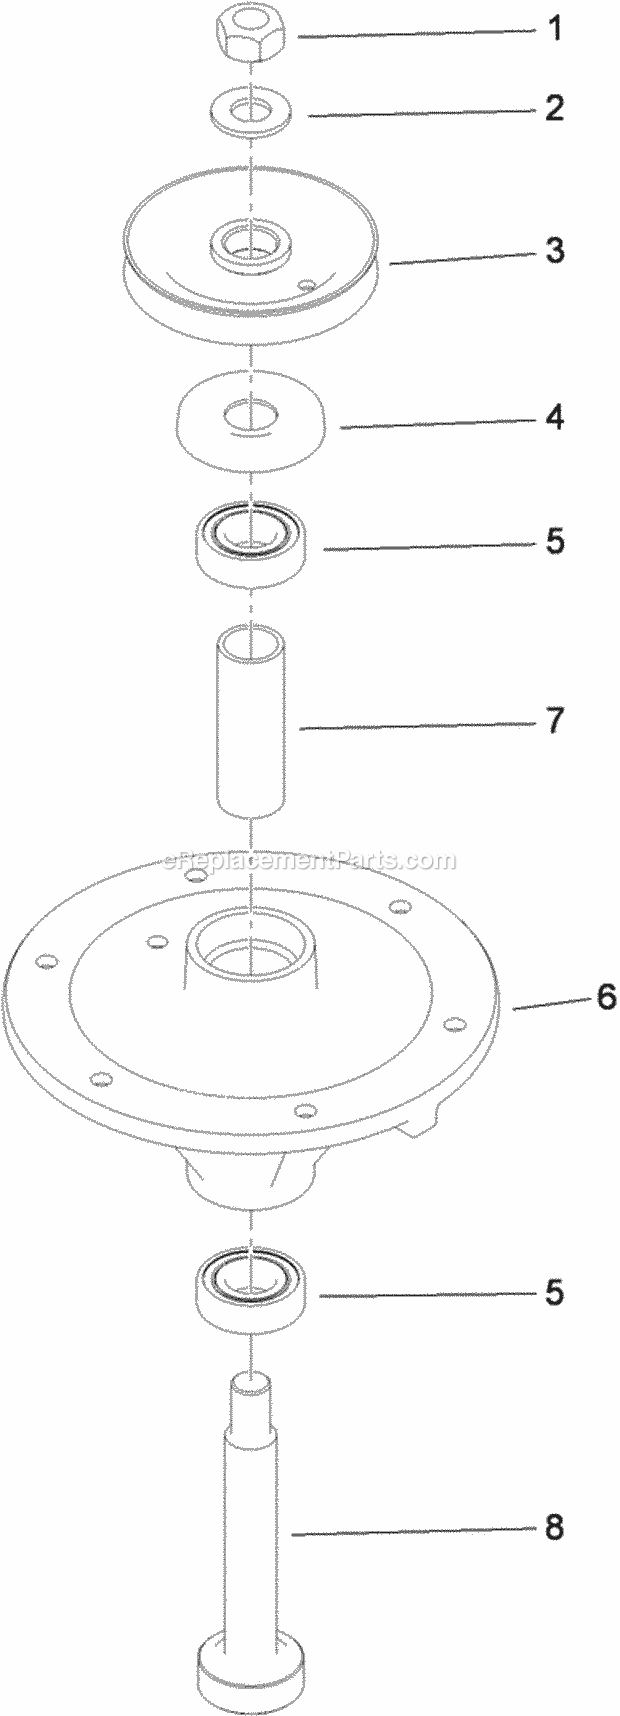 Toro 74536 (310000001-310999999) Grandstand Mower, With 40in Turbo Force Cutting Unit, 2010 Spindle Assembly No. 117-7635 Diagram